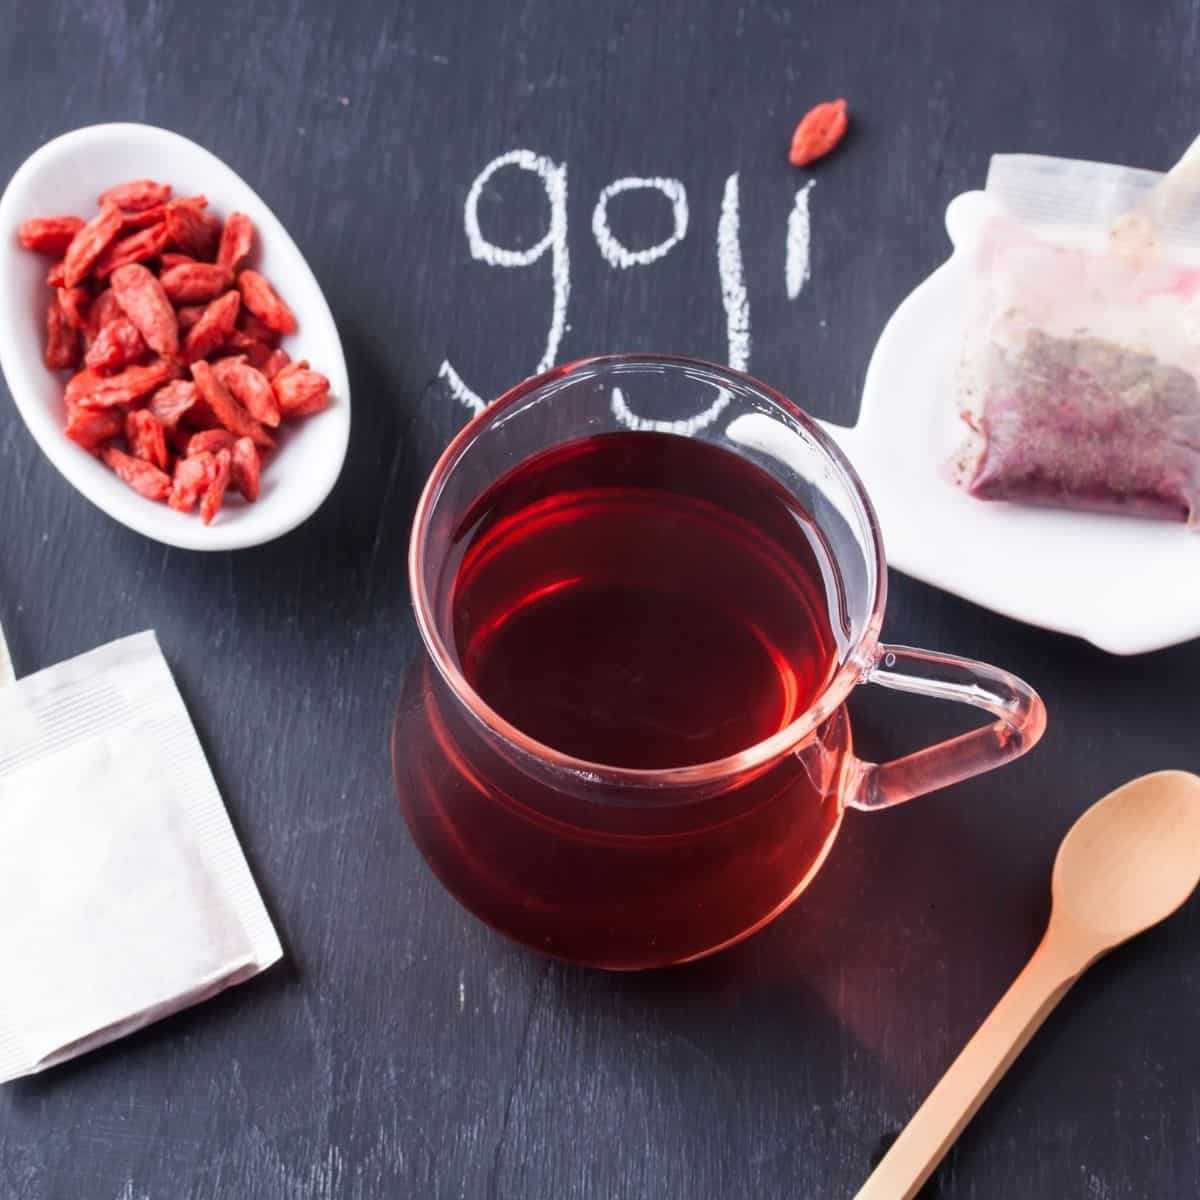 Try These 27 Goji Berry Recipes For A Unique Spin On Superfoods!